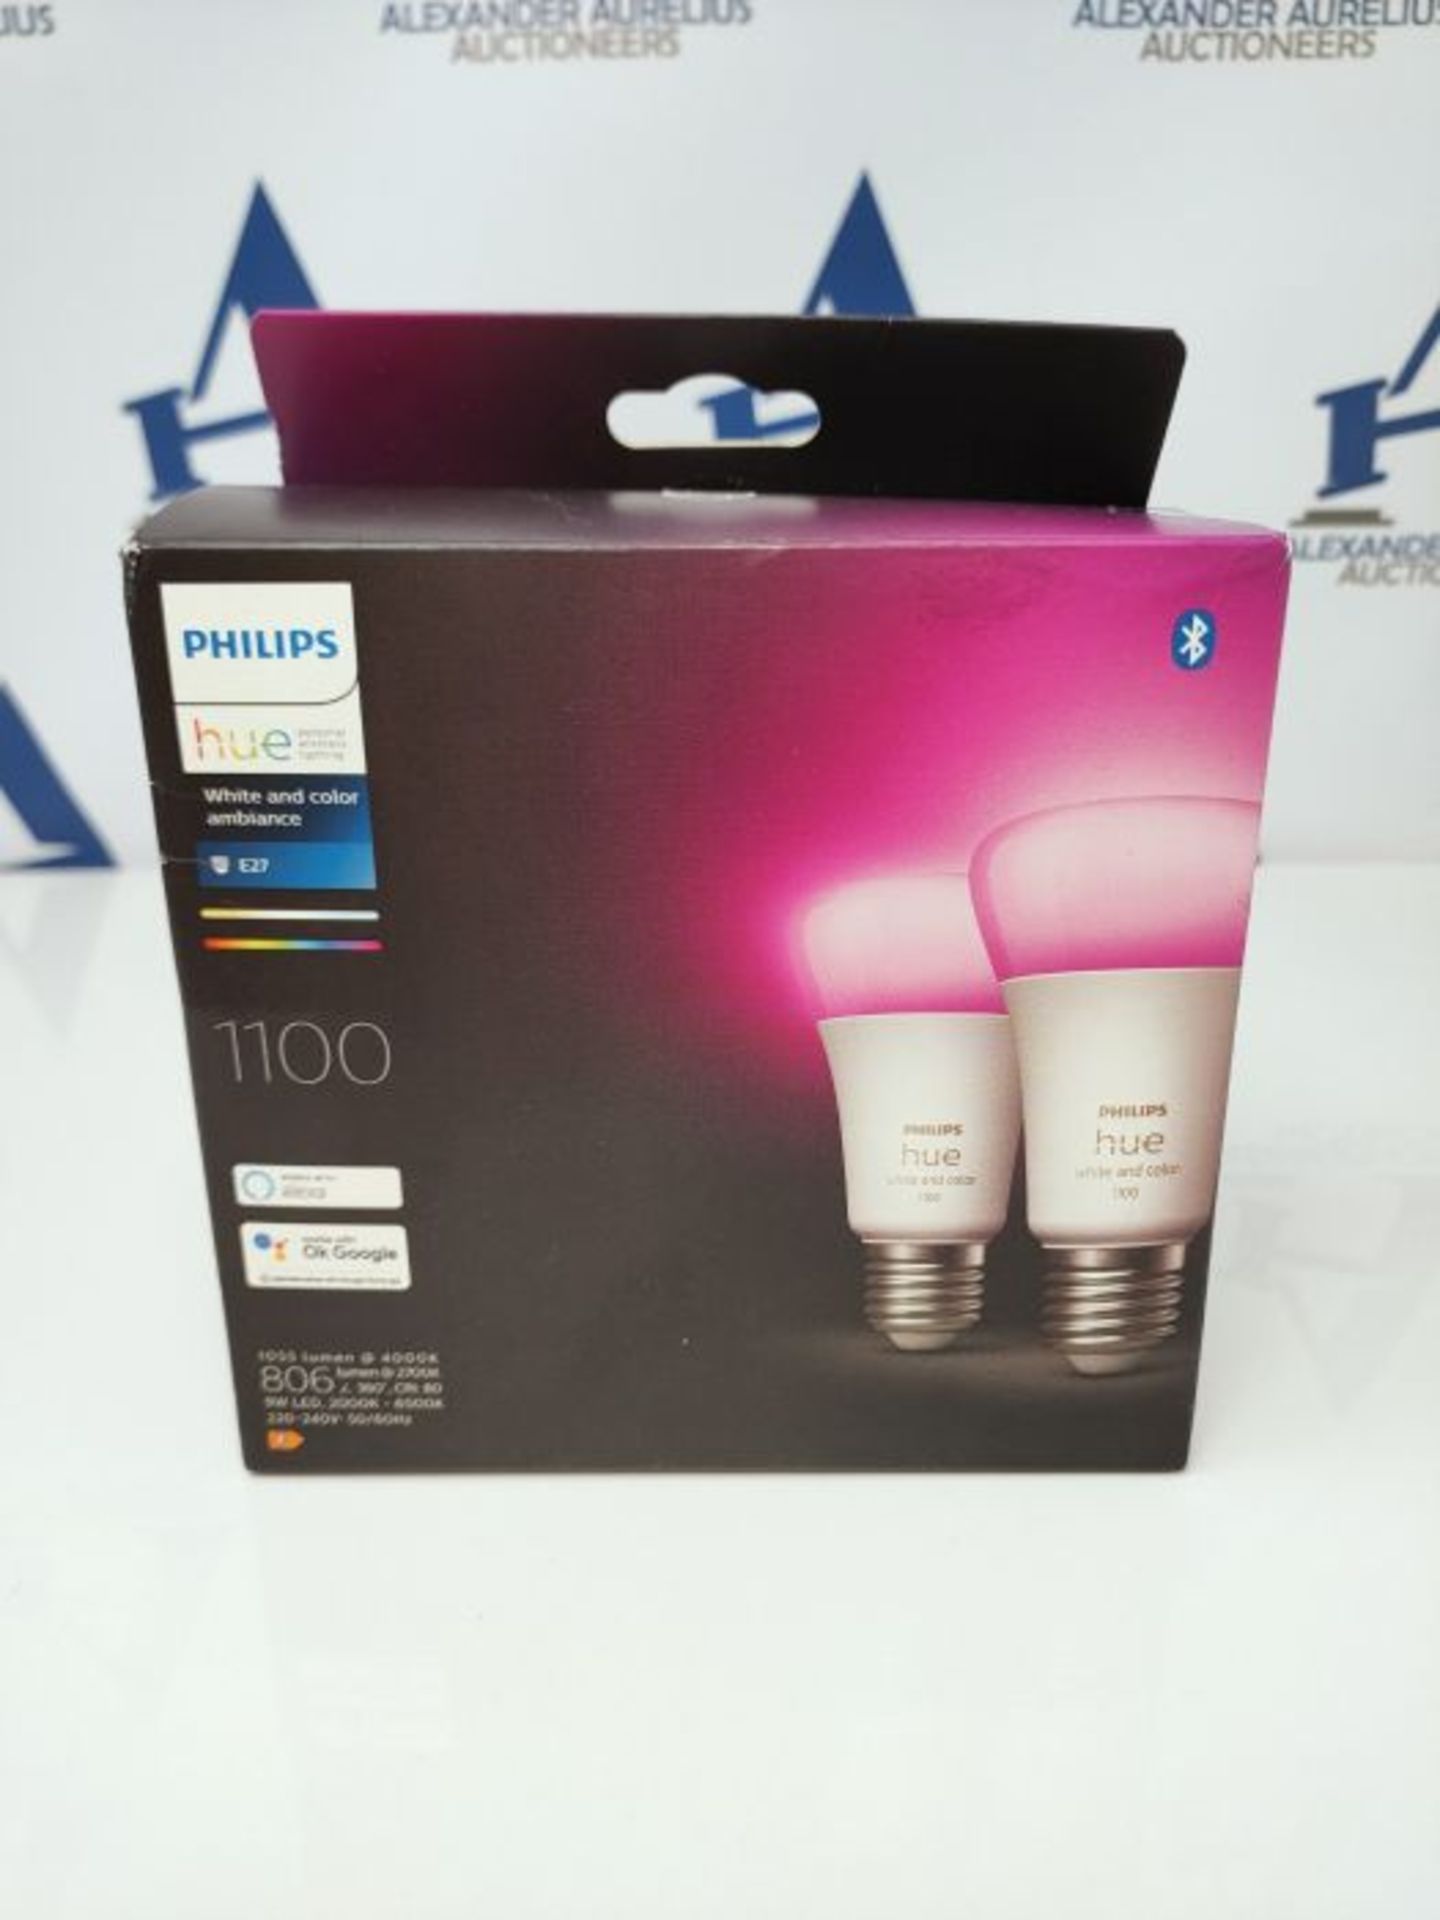 RRP £80.00 Philips Hue New White and Colour Ambiance Smart Light Bulb 2 Pack 75W - 1100 Lumen [E2 - Image 2 of 3